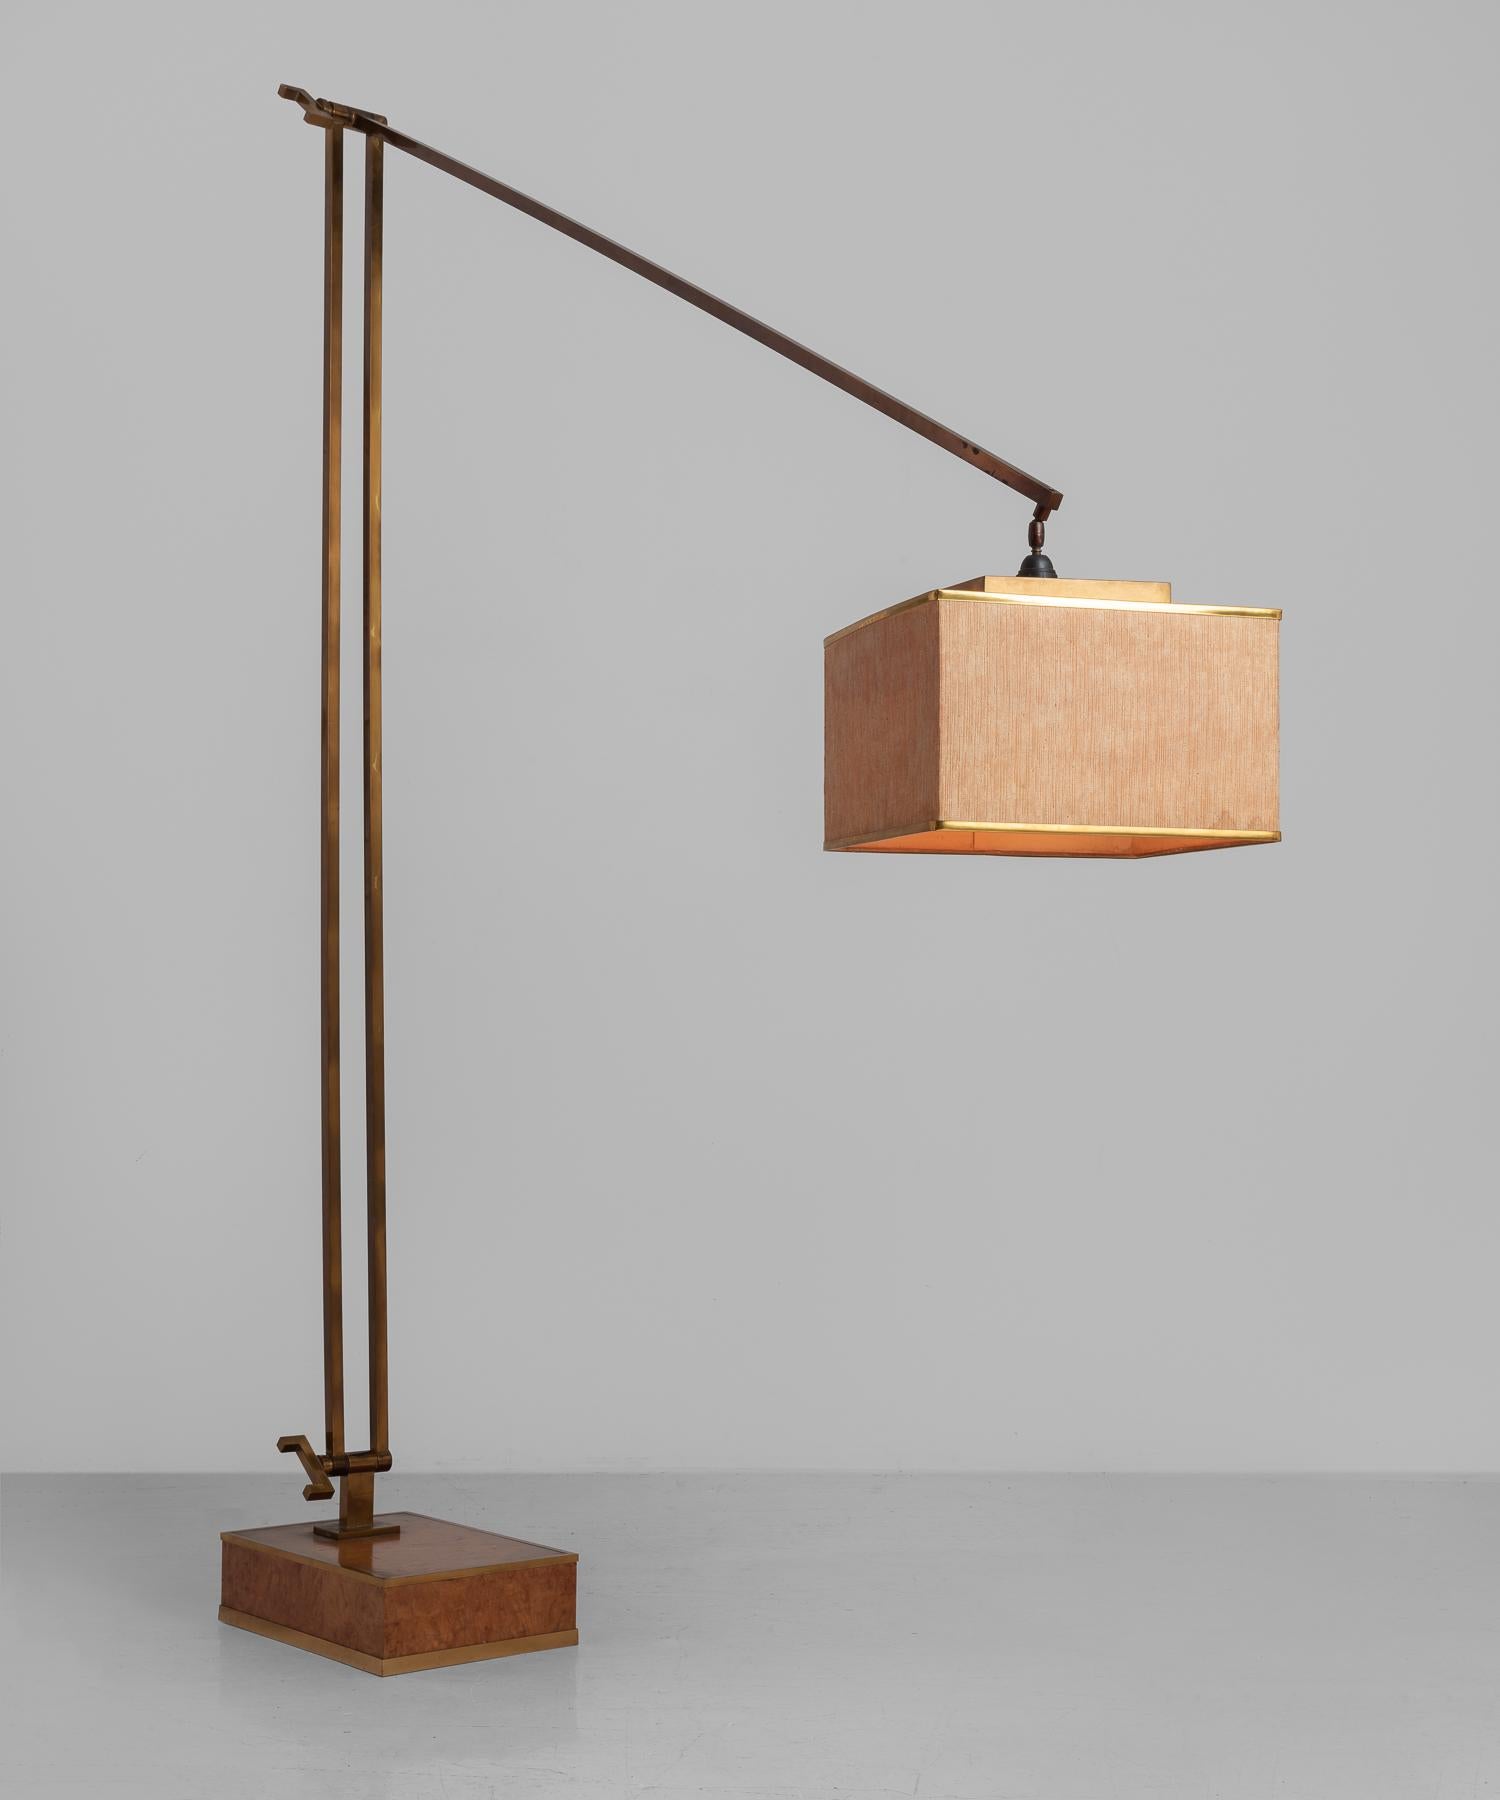 Brass floor lamp by Romeo Rega, Italy, circa 1970.

Elegant floor lamp with wooden base, brass structure and original fabric shade.

Base - 11.25